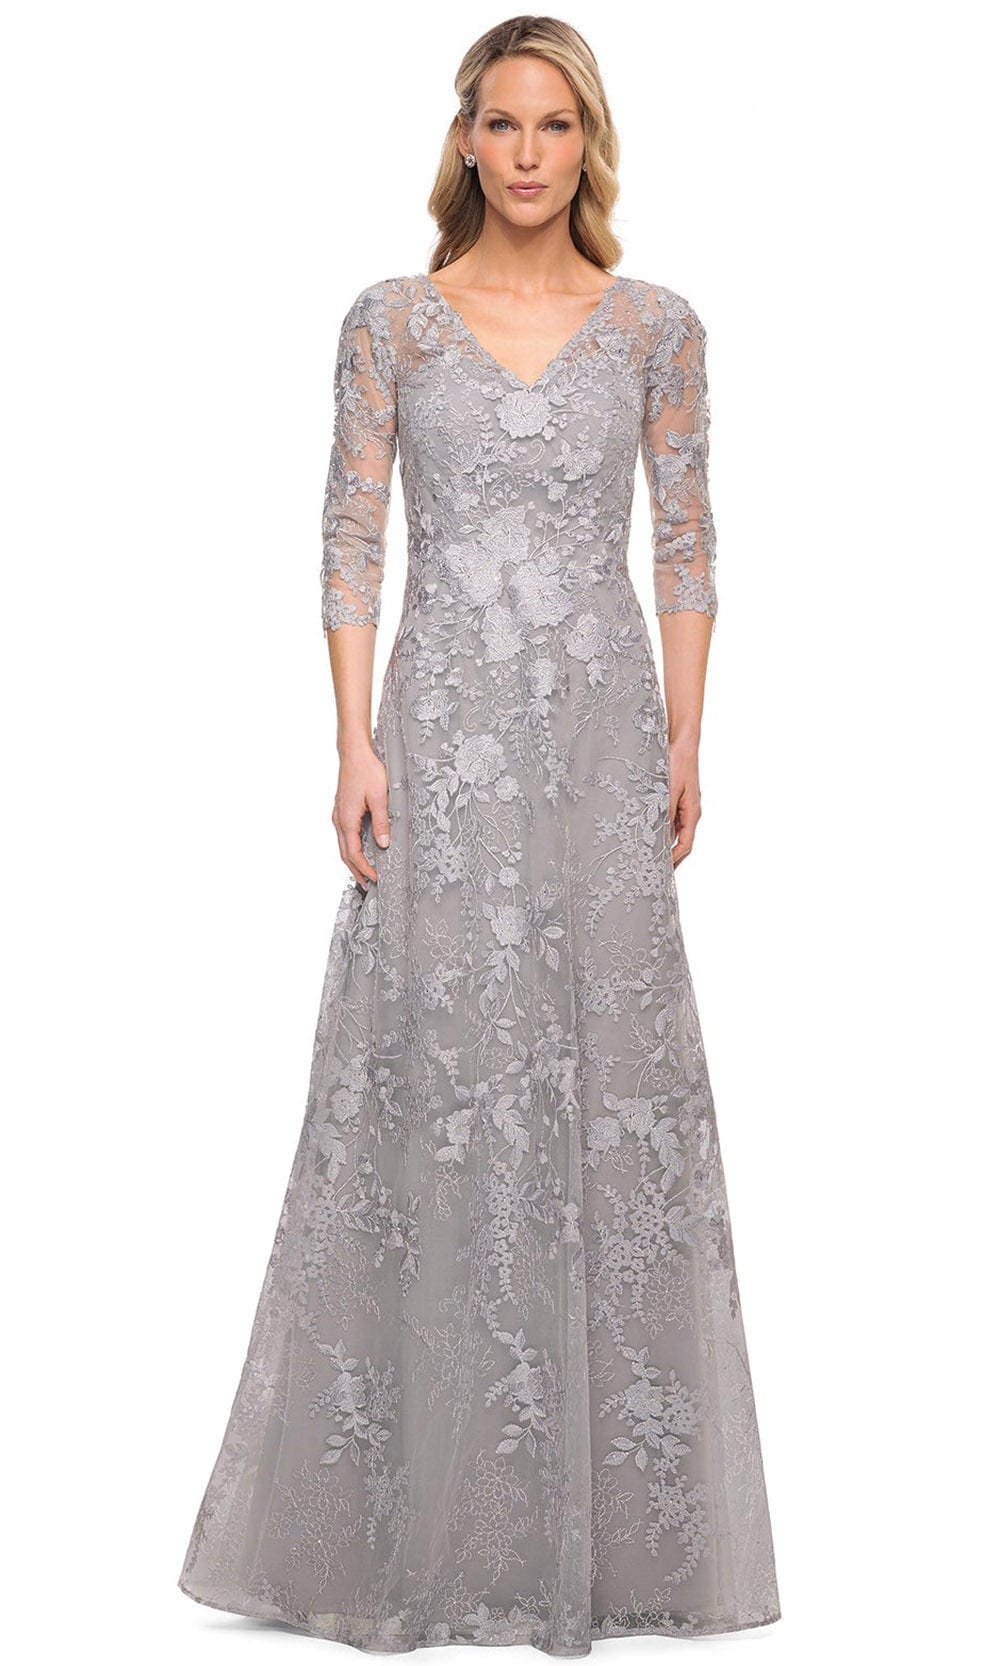 Image of La Femme 29989 - Embroidered Sheer Lace Mother of the Groom V-Neck Gown